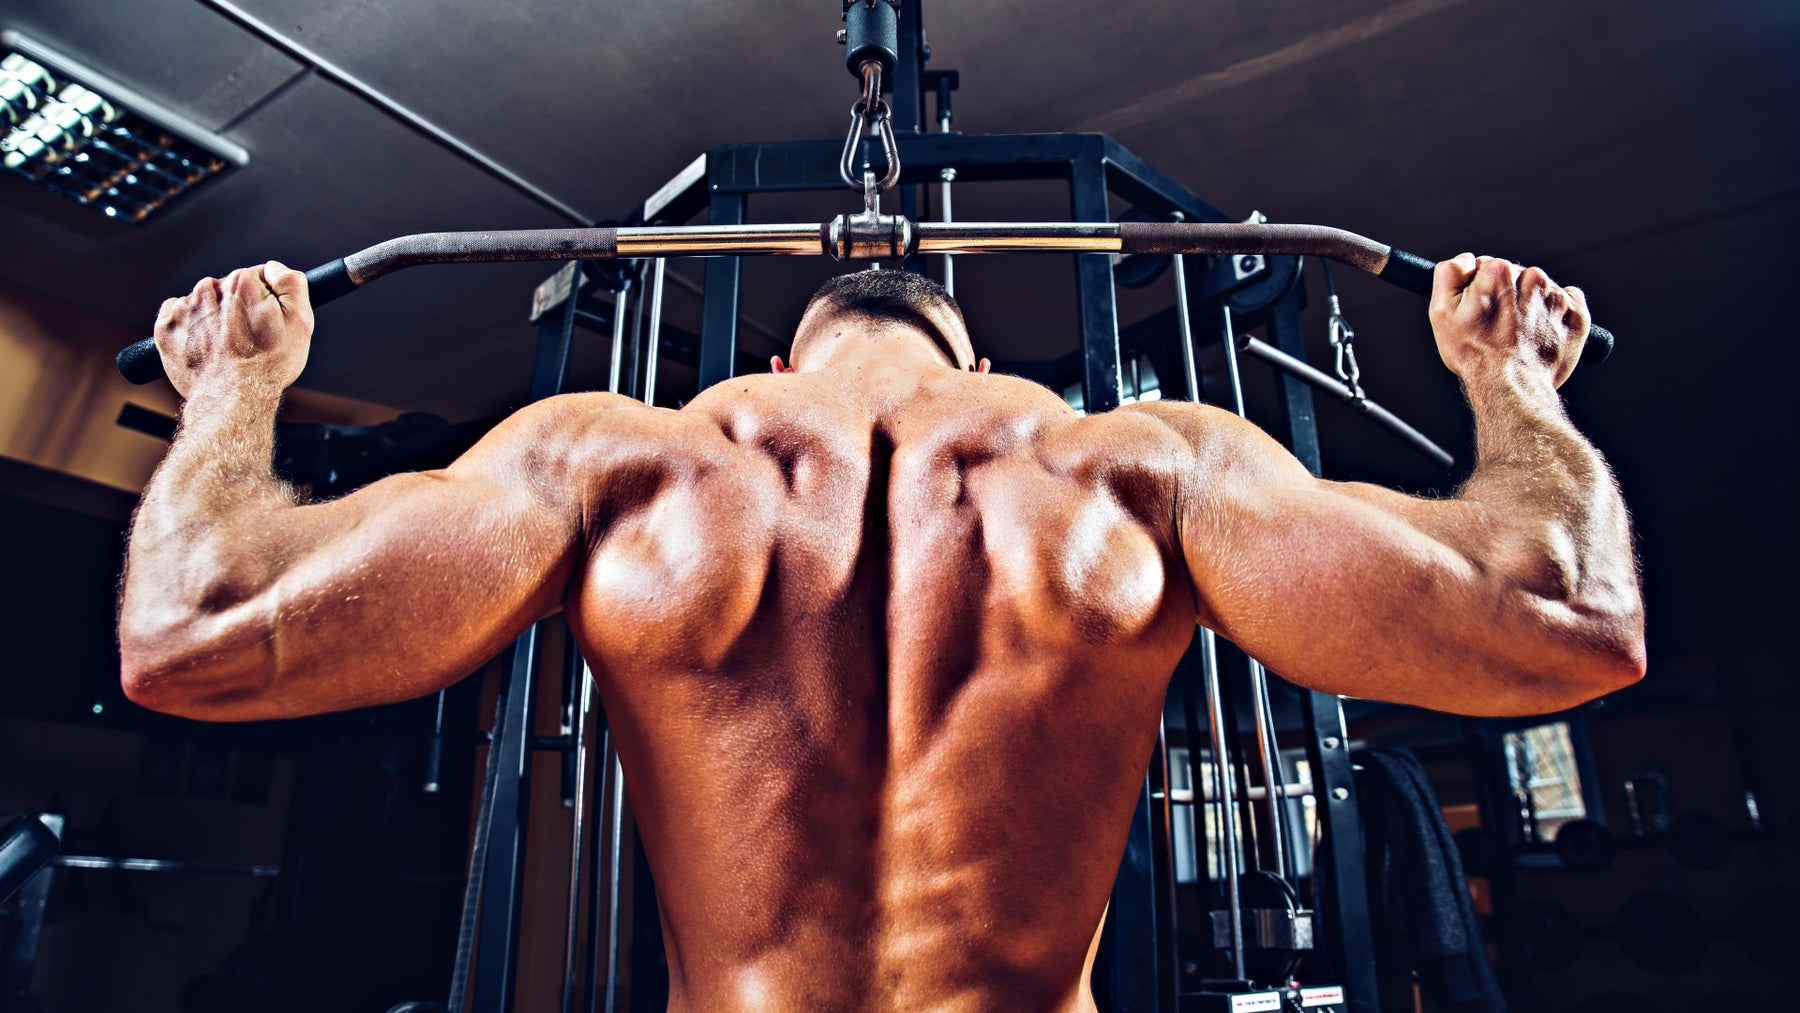 How to Perform the Lat Pulldown Behind the Neck